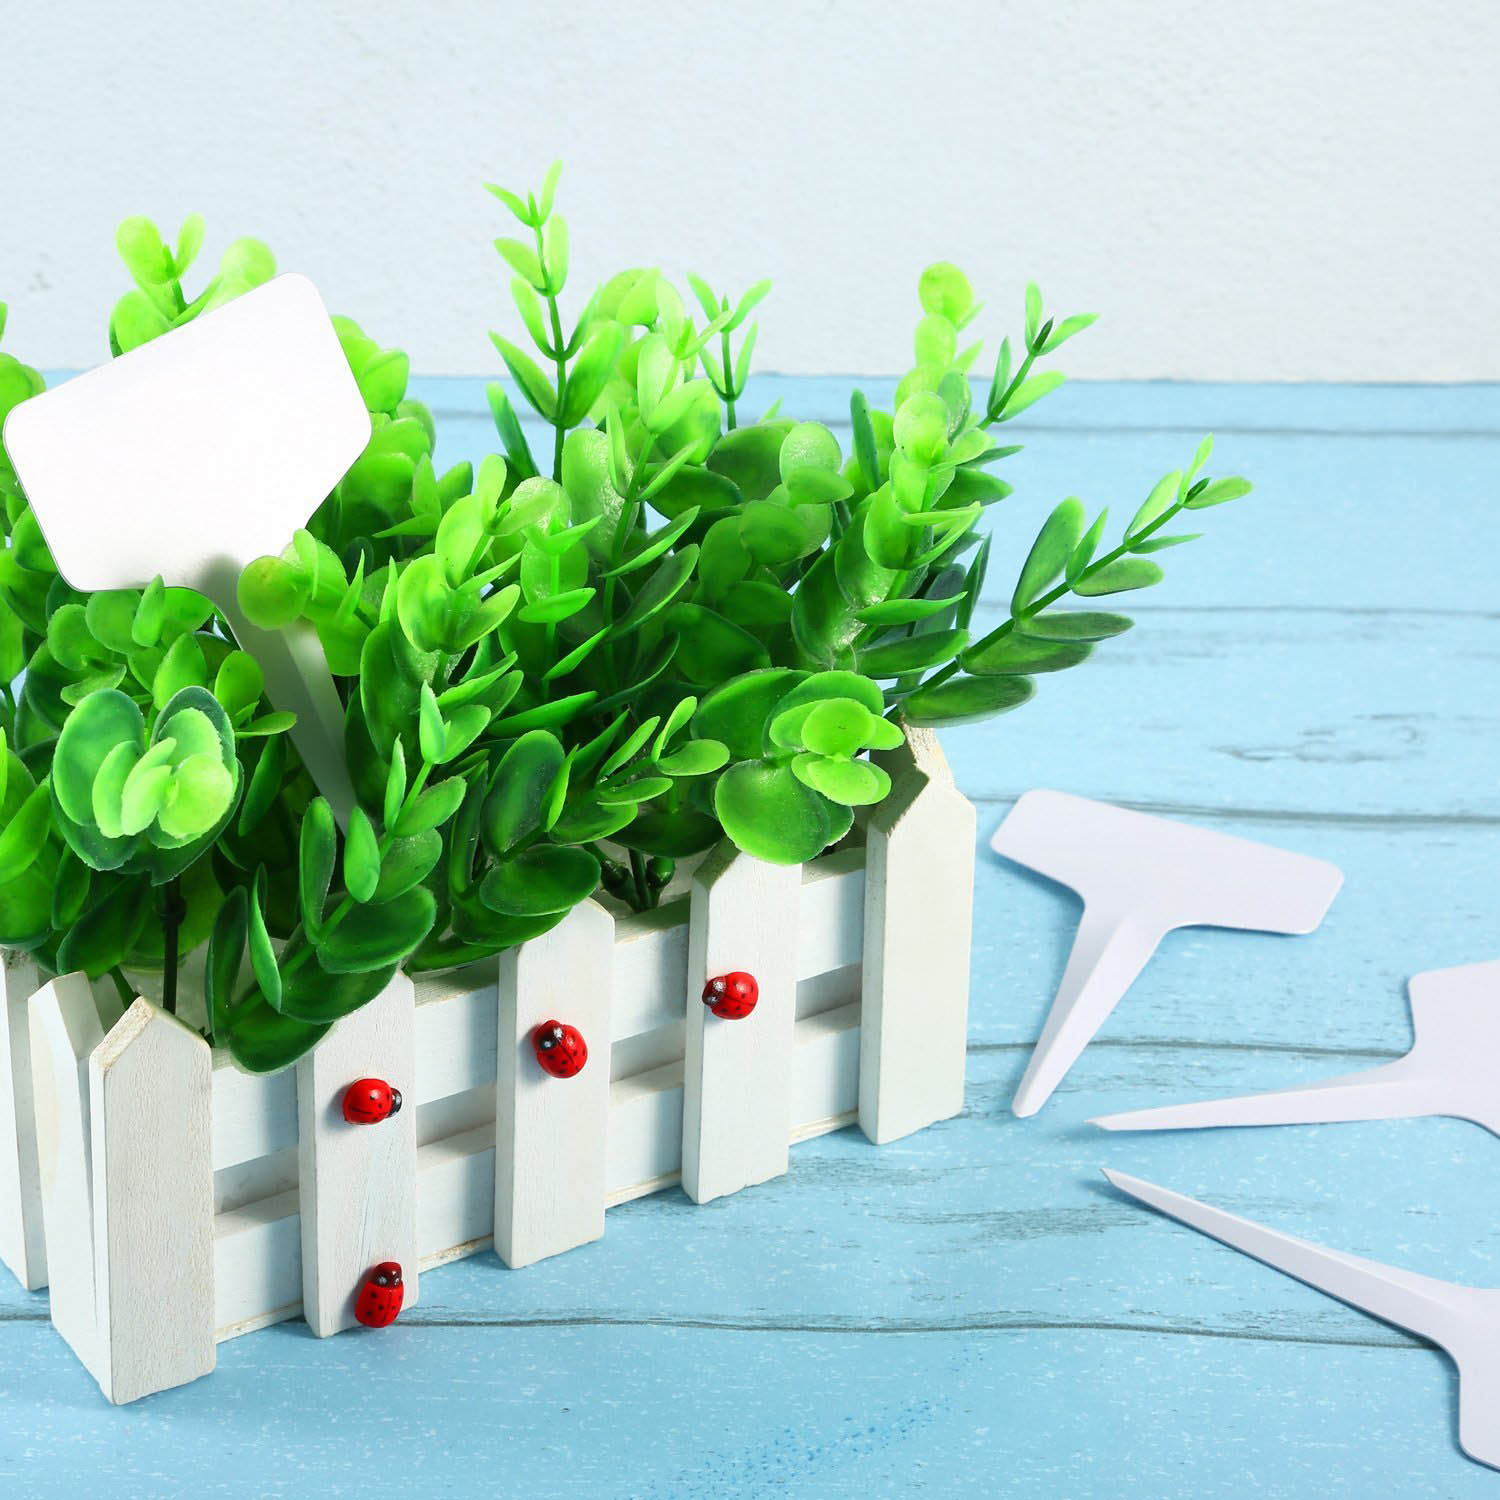 Hot Sale 200 Pack 6 x 10 cm Plant T-type Tags Plastic Garden Labels Tags Marker Waterproof, White